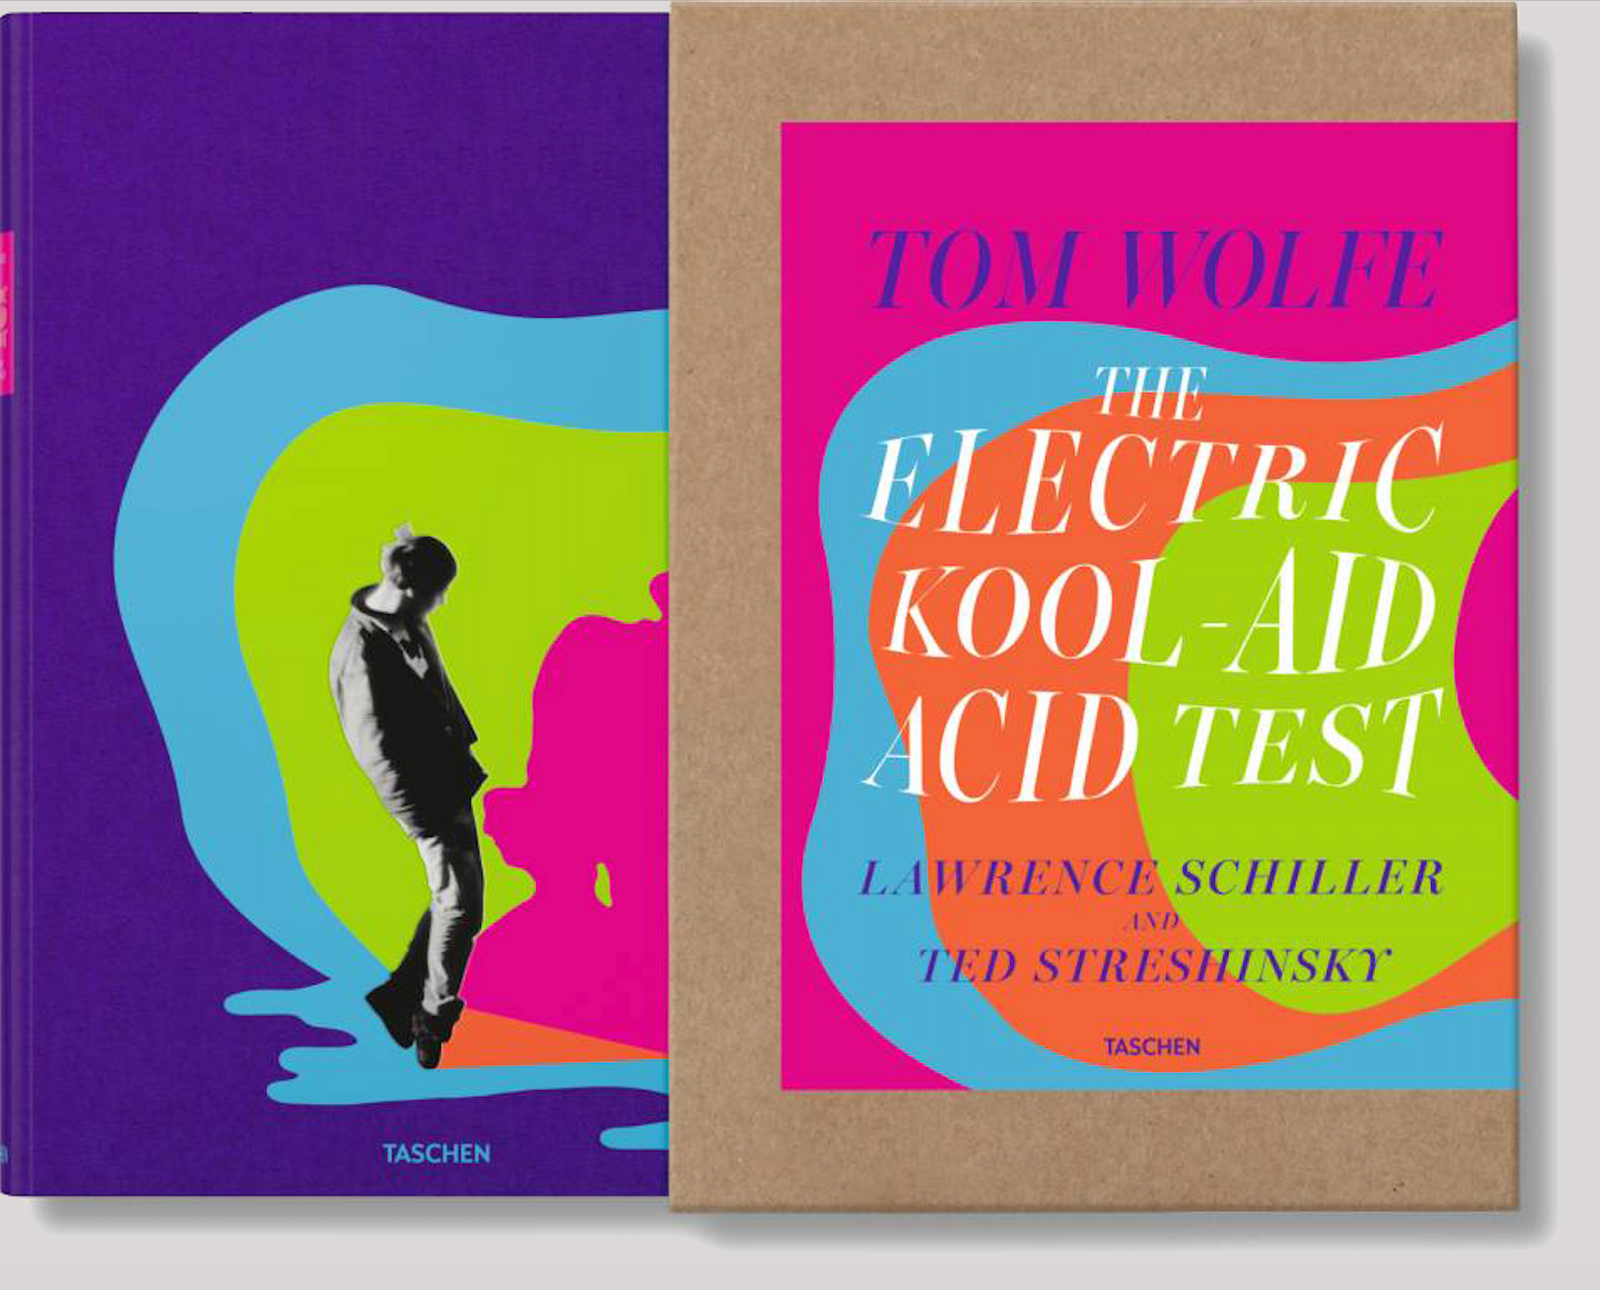 Tom Wolfe. The Electric Kool-Aid Acid Test. Photographs by Lawrence Schiller & Ted Streshinsky - Secret Location